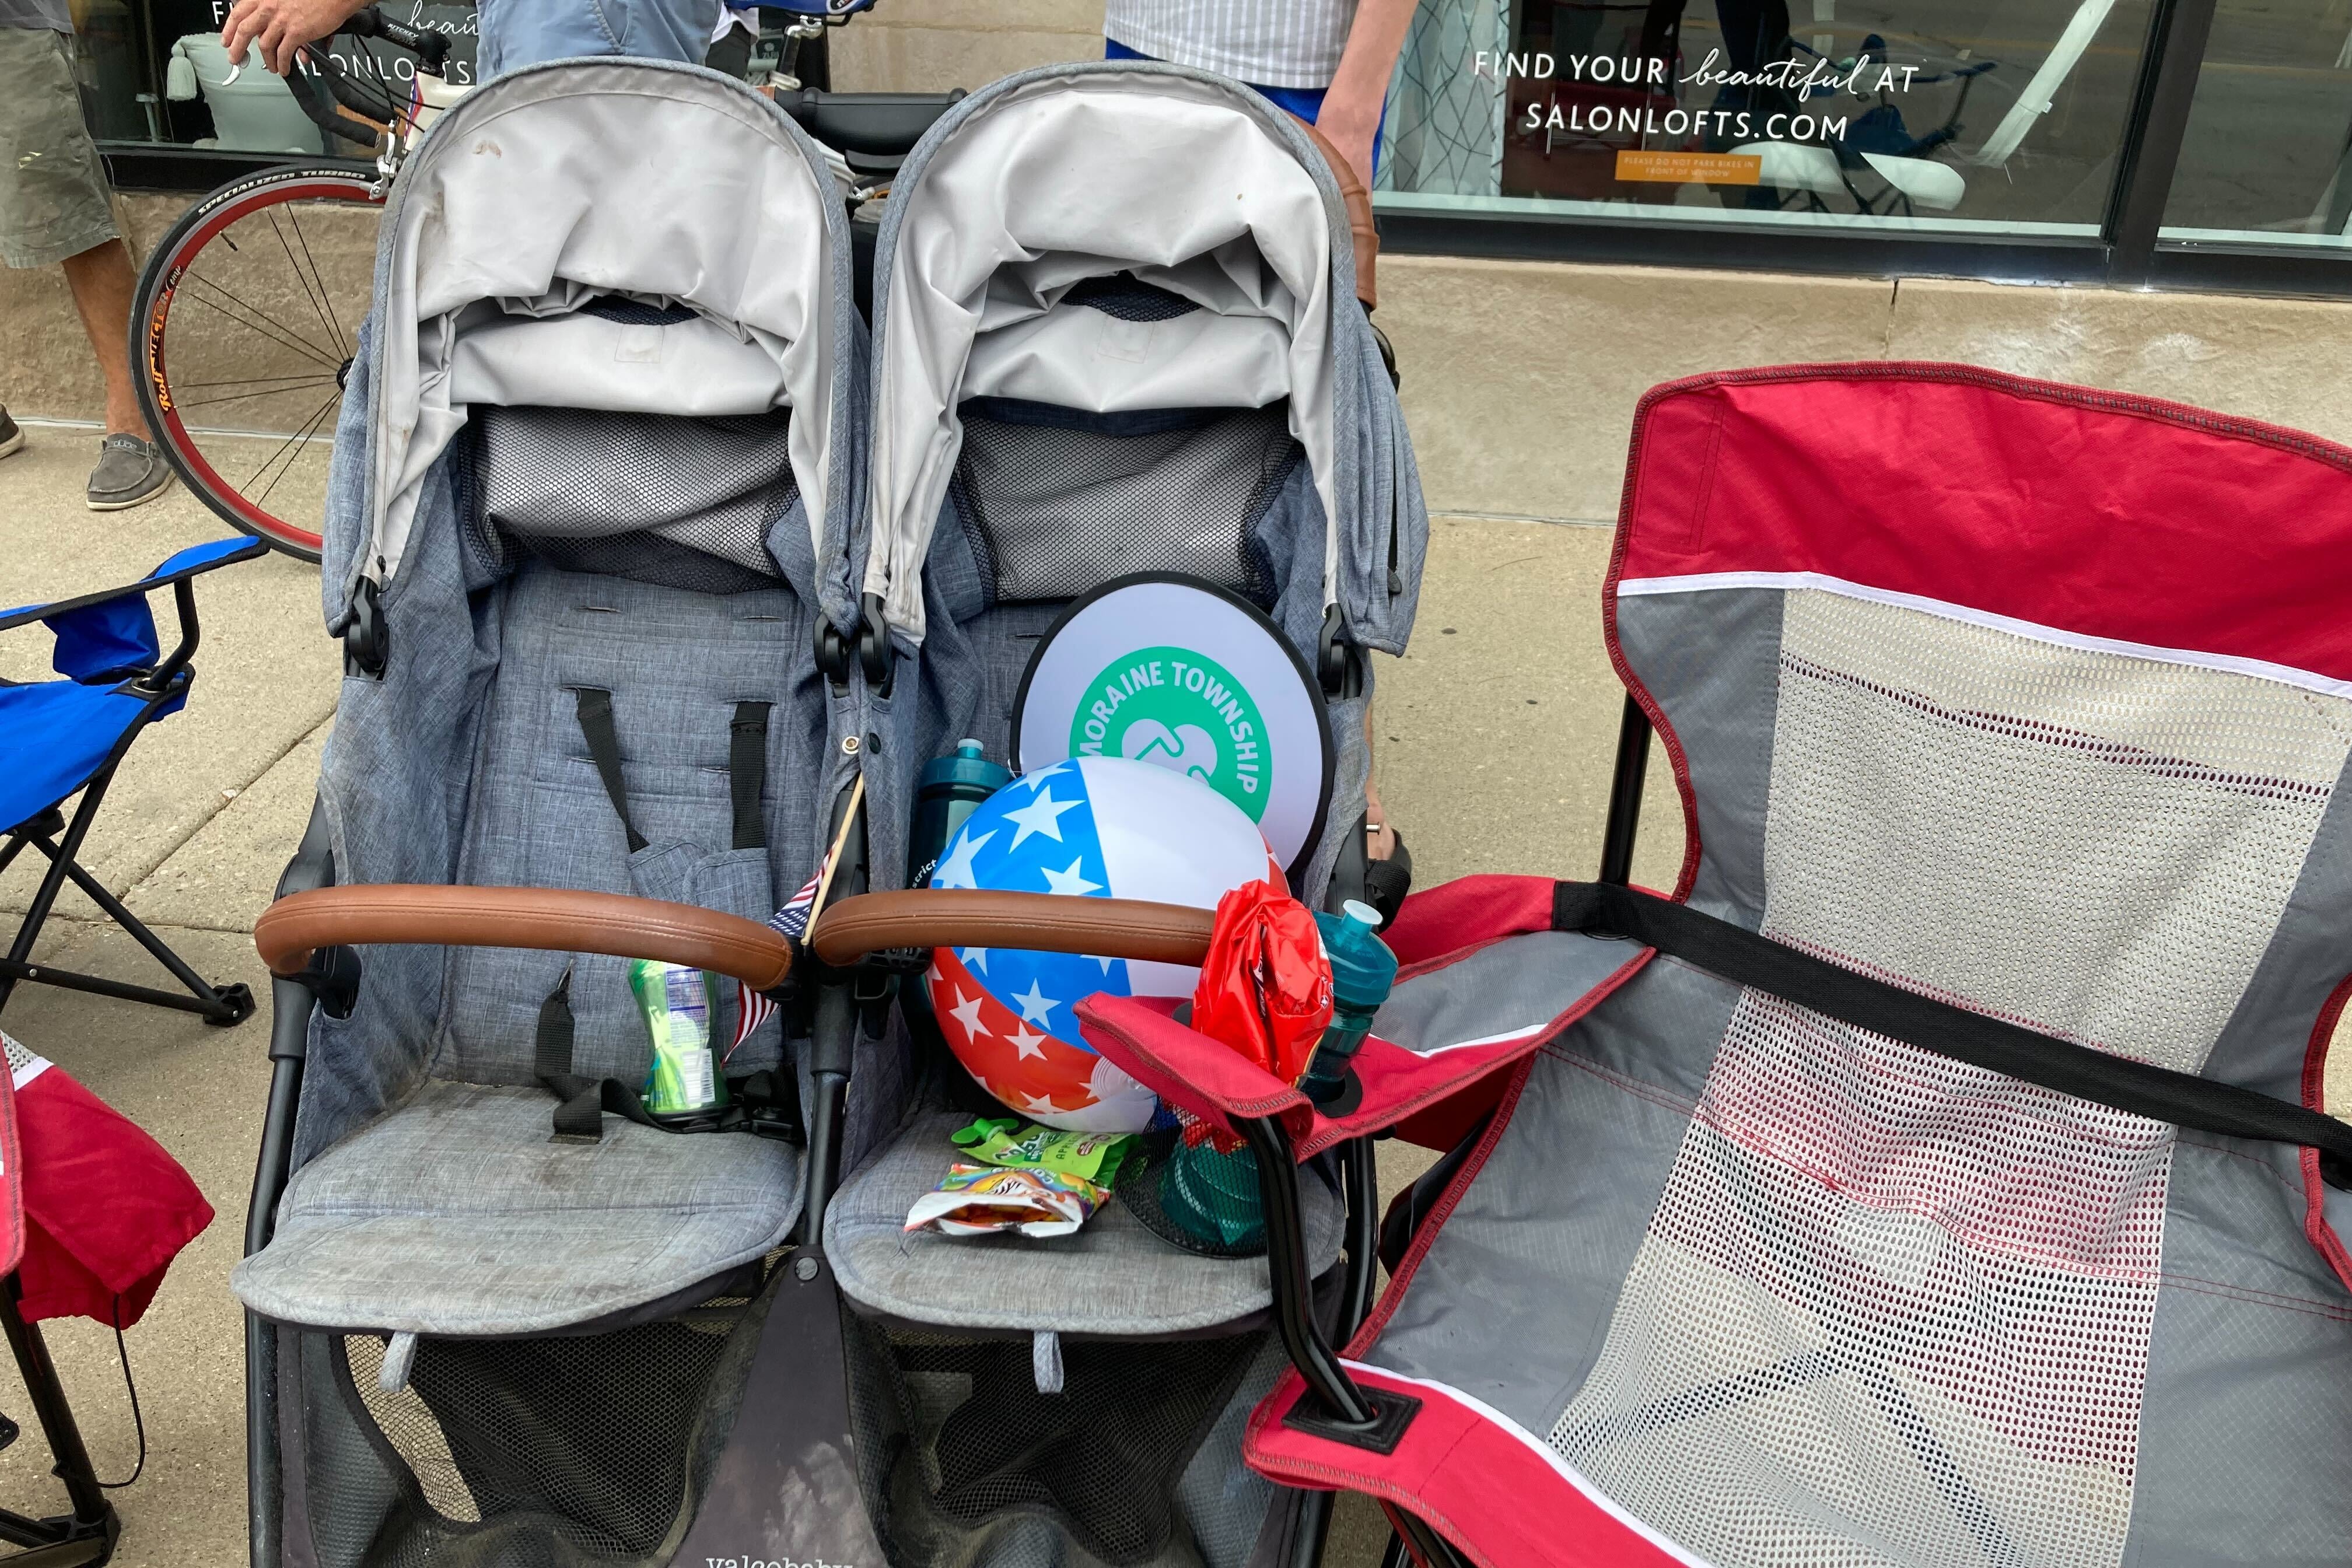 More abandoned strollers.